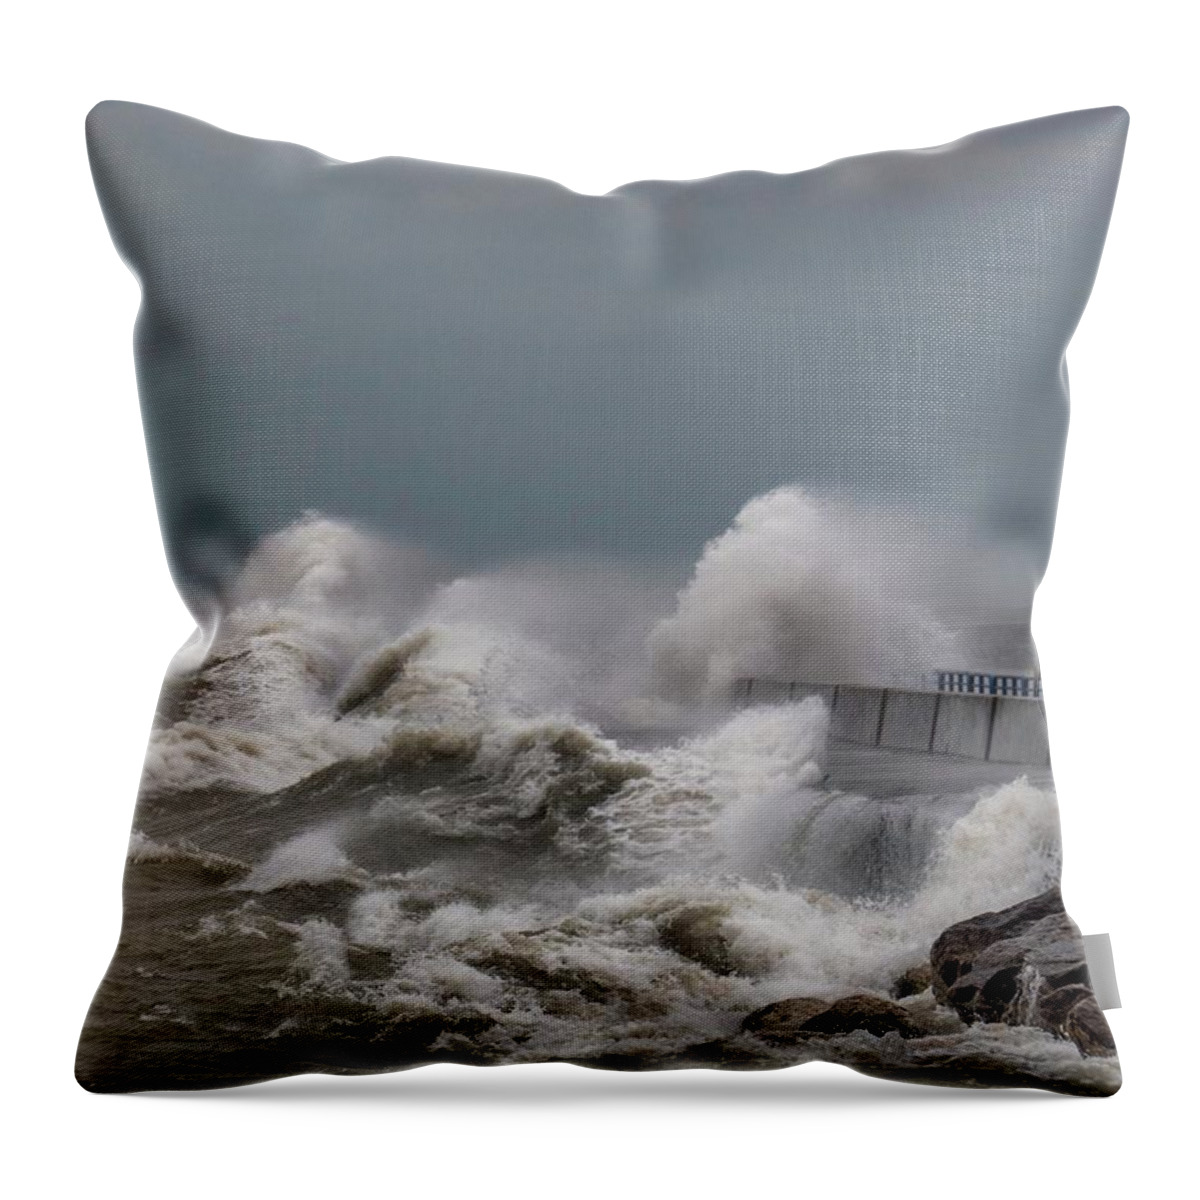 Government Pier Throw Pillow featuring the photograph Water Power by Kristine Hinrichs